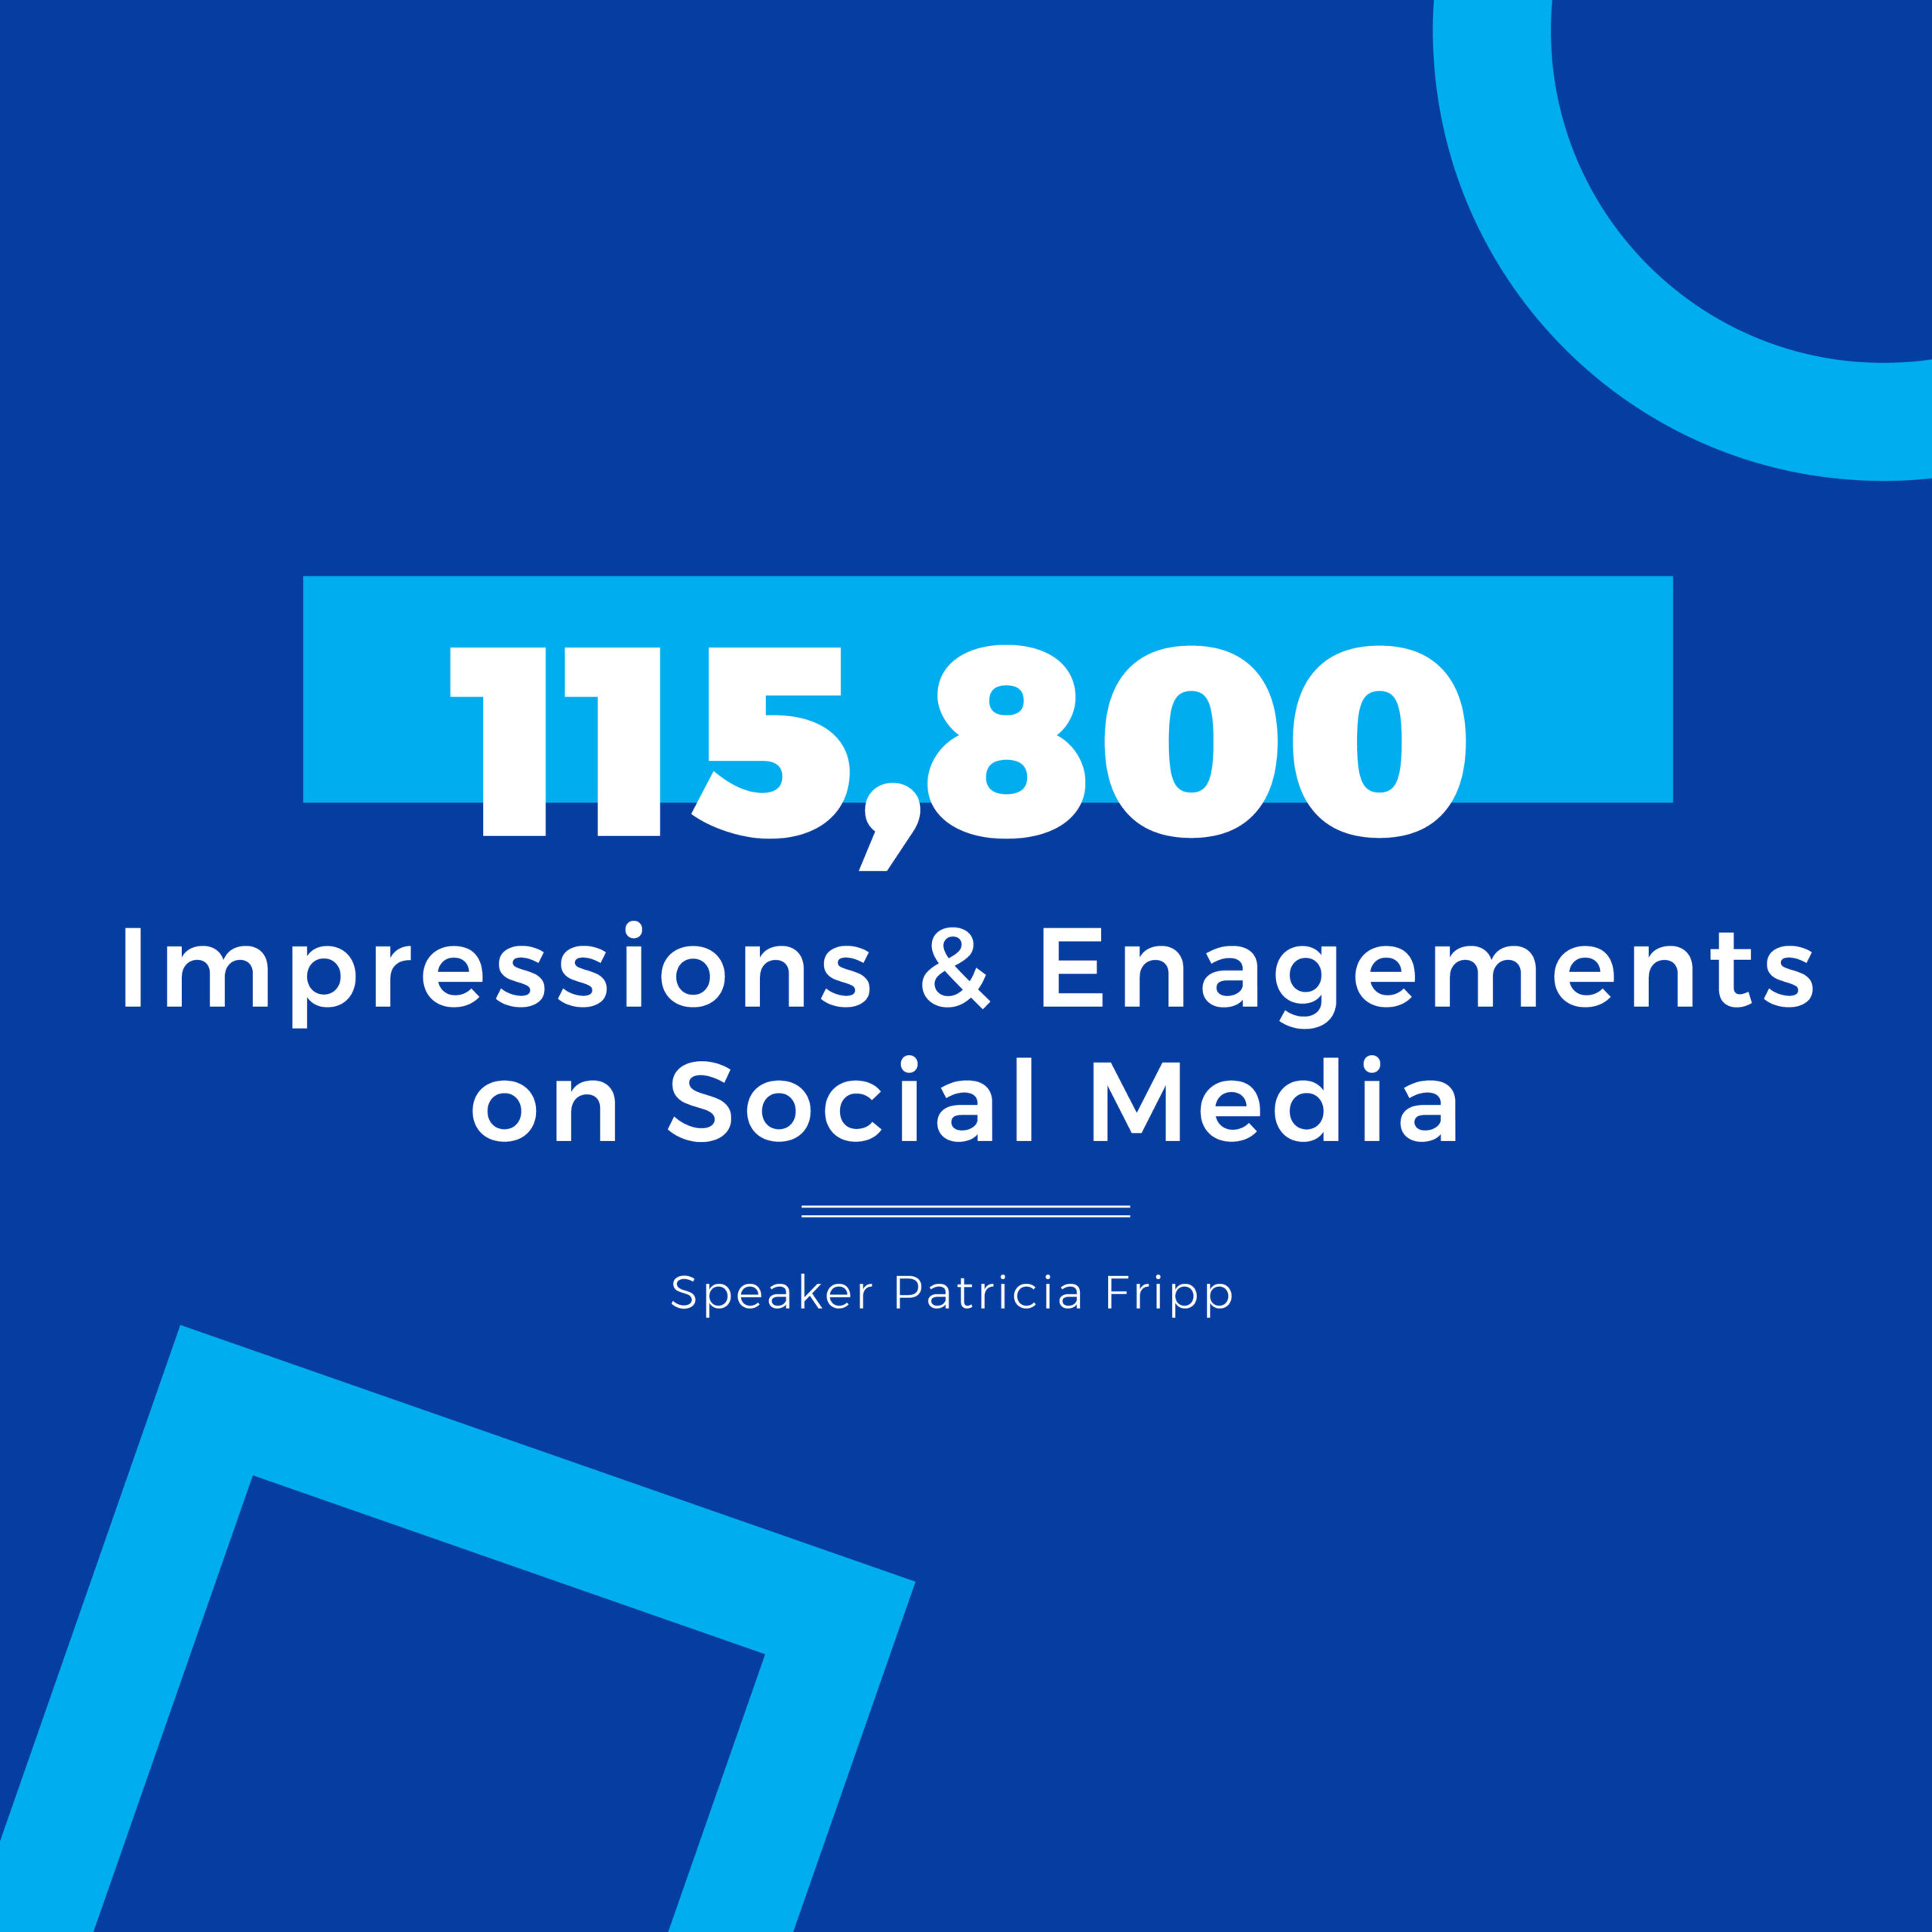 How We Used Social Media to Drive 115,800 Impressions & Engagements for Hall of Fame Speaker Patricia Fripp